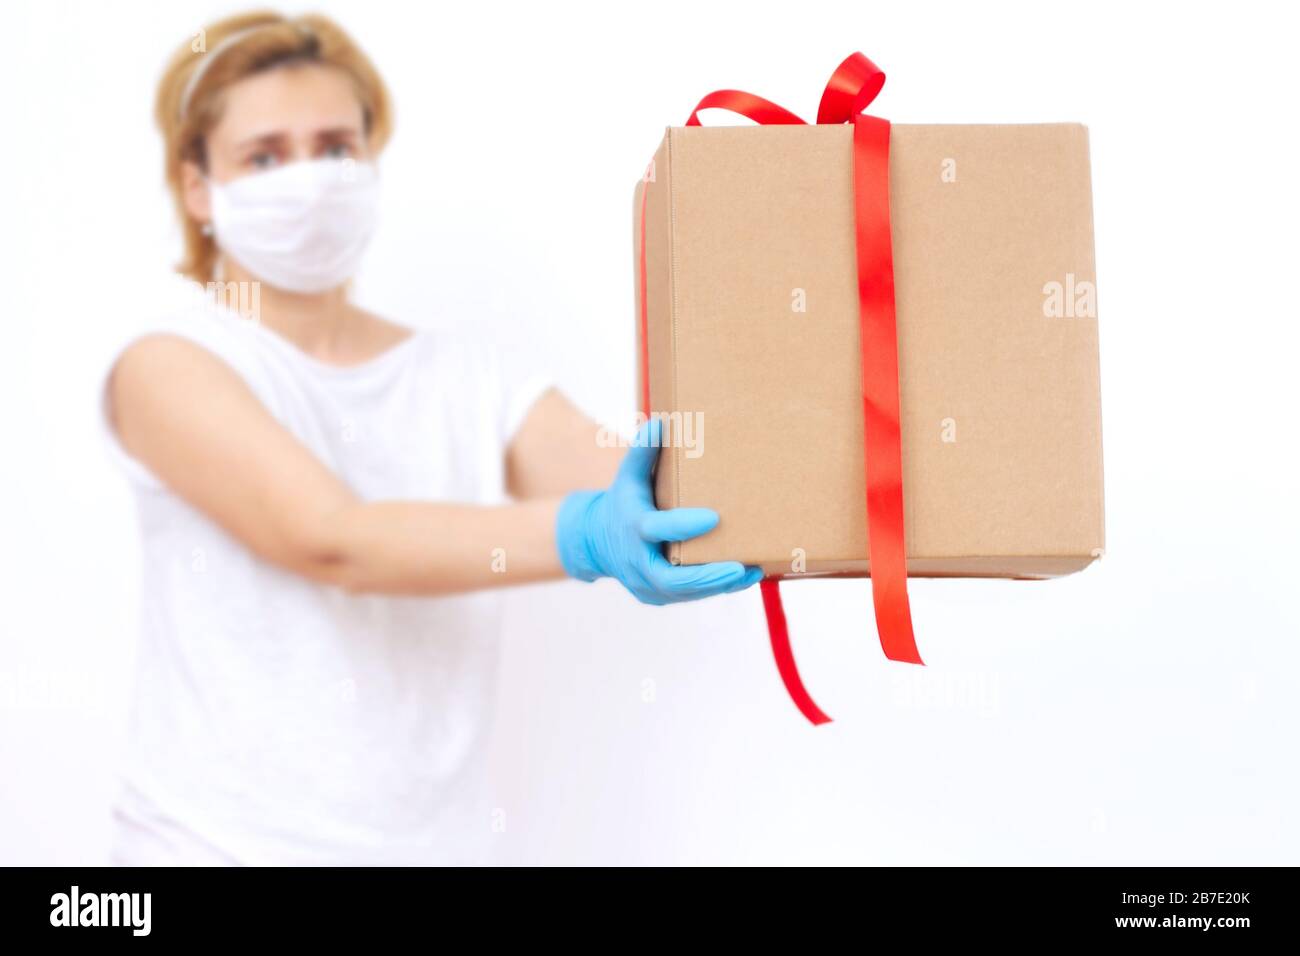 Delivery by courier in rubber gloves and medical mask. The shipping time during coronavirus. Delivery man holding cardboard boxes. copy space.  Stock Photo